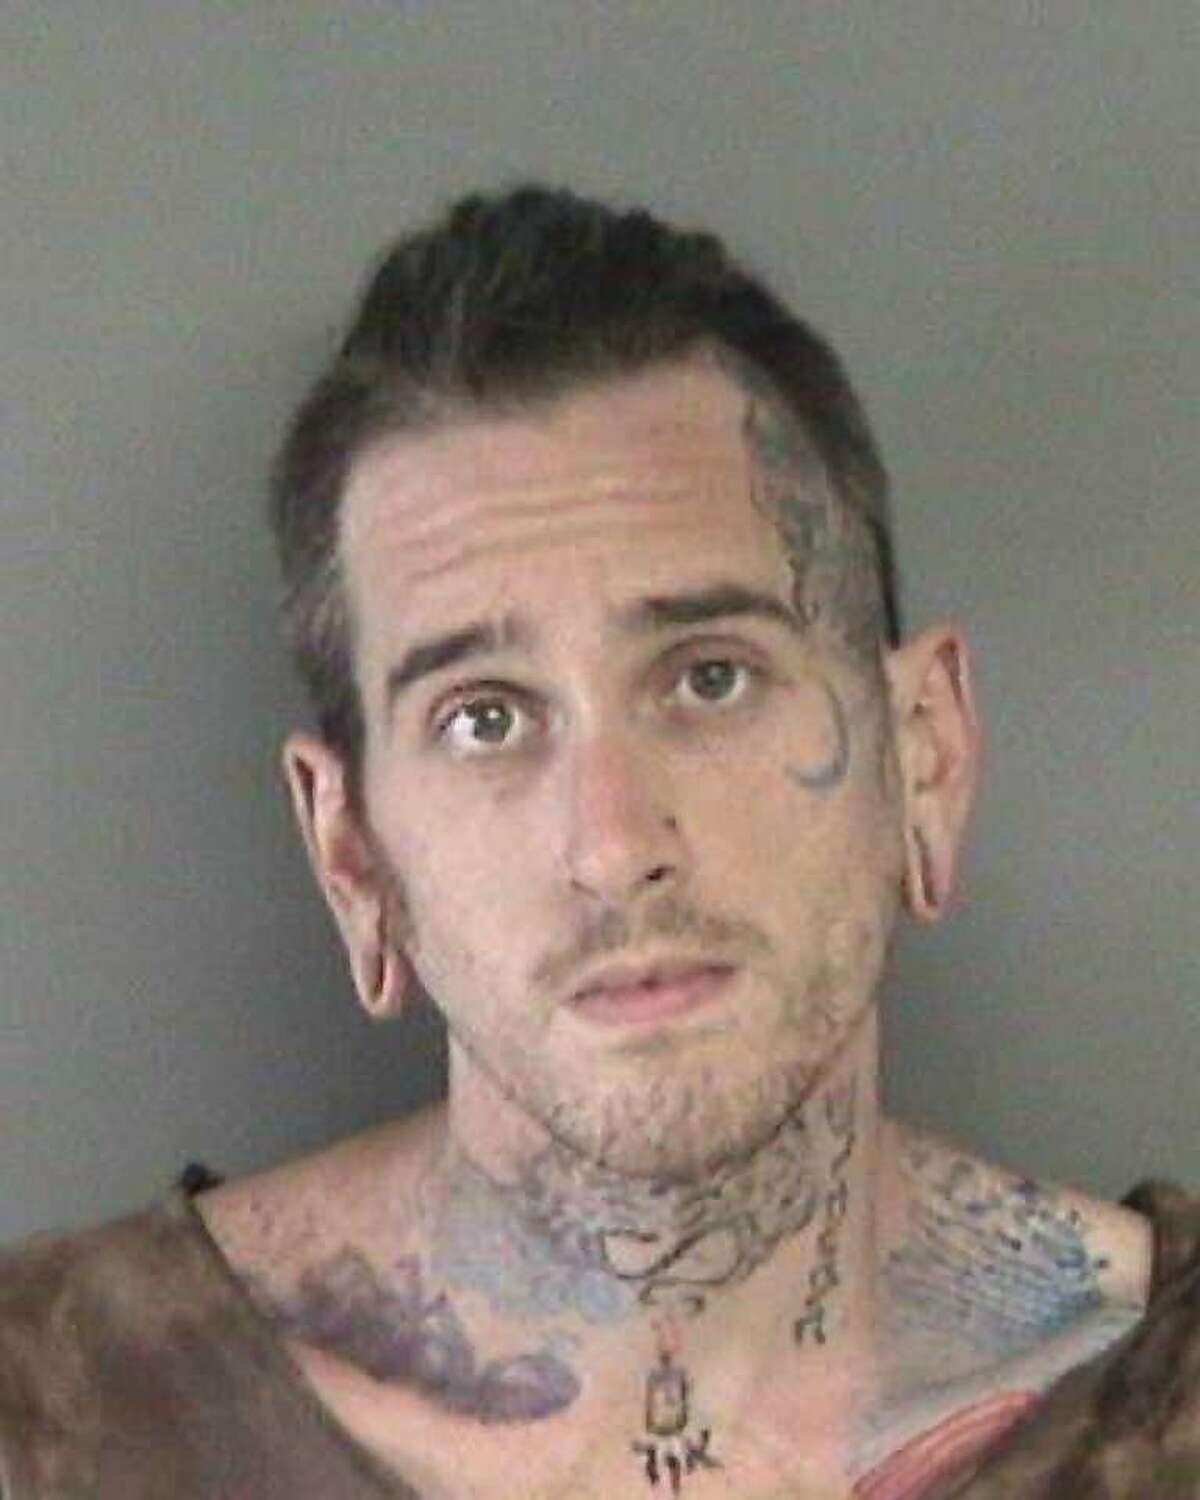 Max Harris was booked into Santa Rita Jail in Dublin, CA at 430pm on Thursday, June 8, 2017 on 36 counts of involuntary manslaughter related to the Ghost Ship fire in Oakland, Calif .